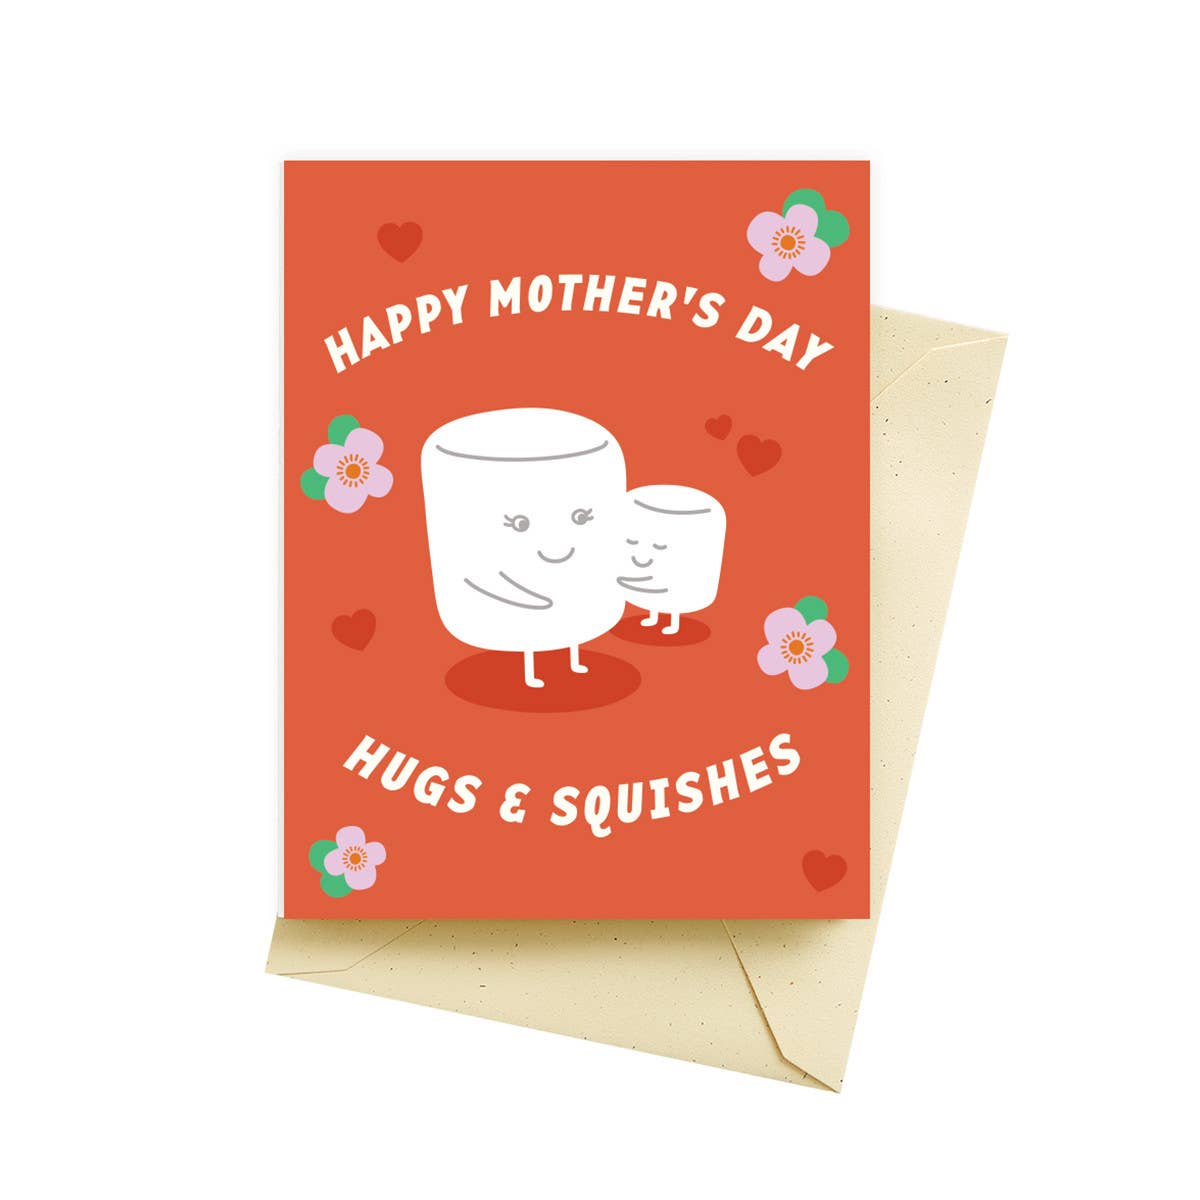 red mother's day greeting card with hearts, flowers and two marshmallows on it. Text reads "Happy mother's day. Hugs & squishes"